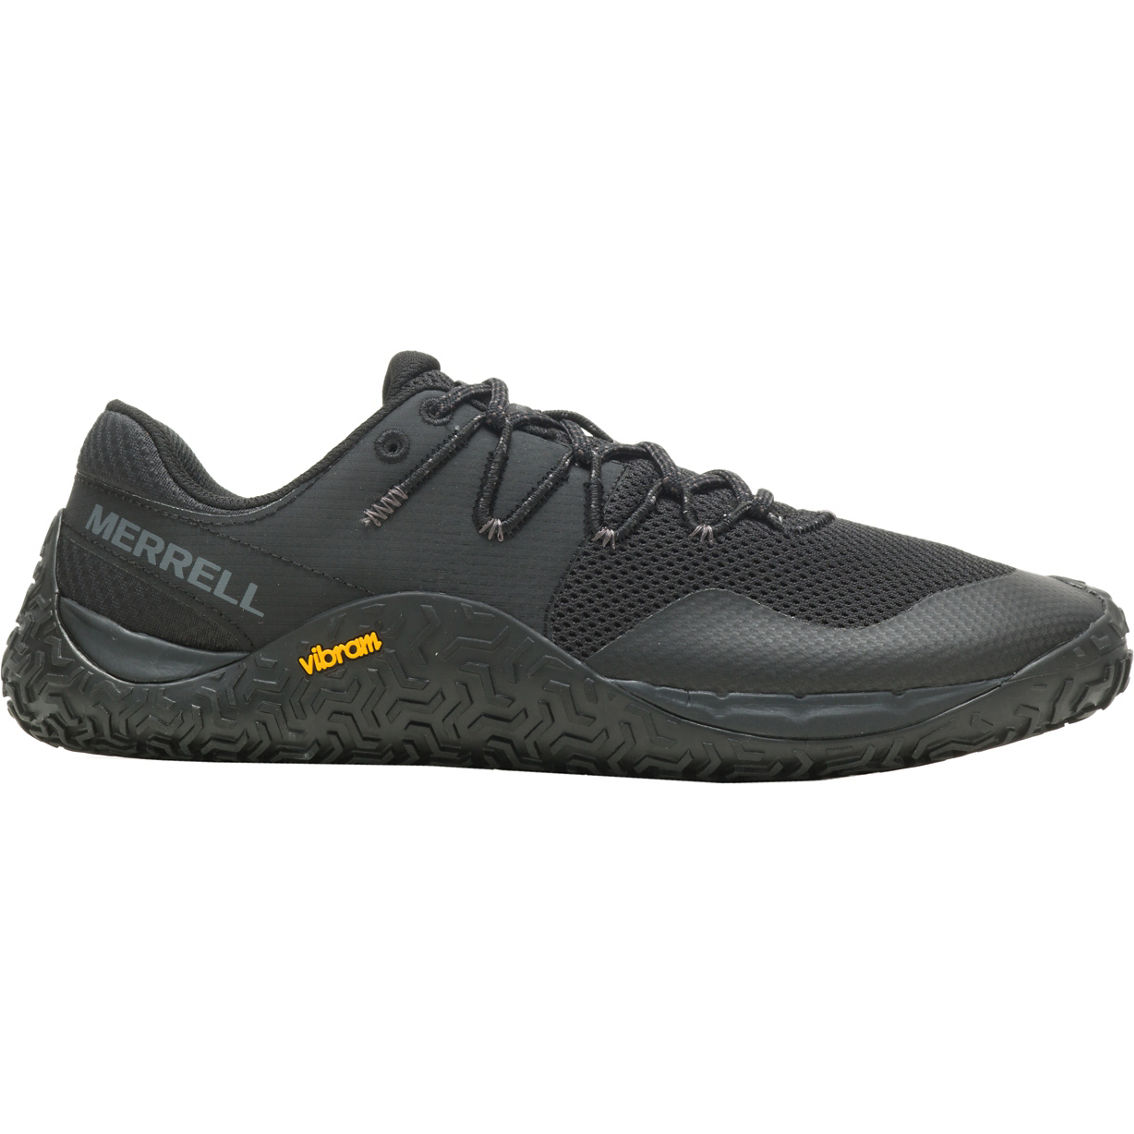 Merrell Men's Trail Glove 7 Shoes - Image 2 of 6